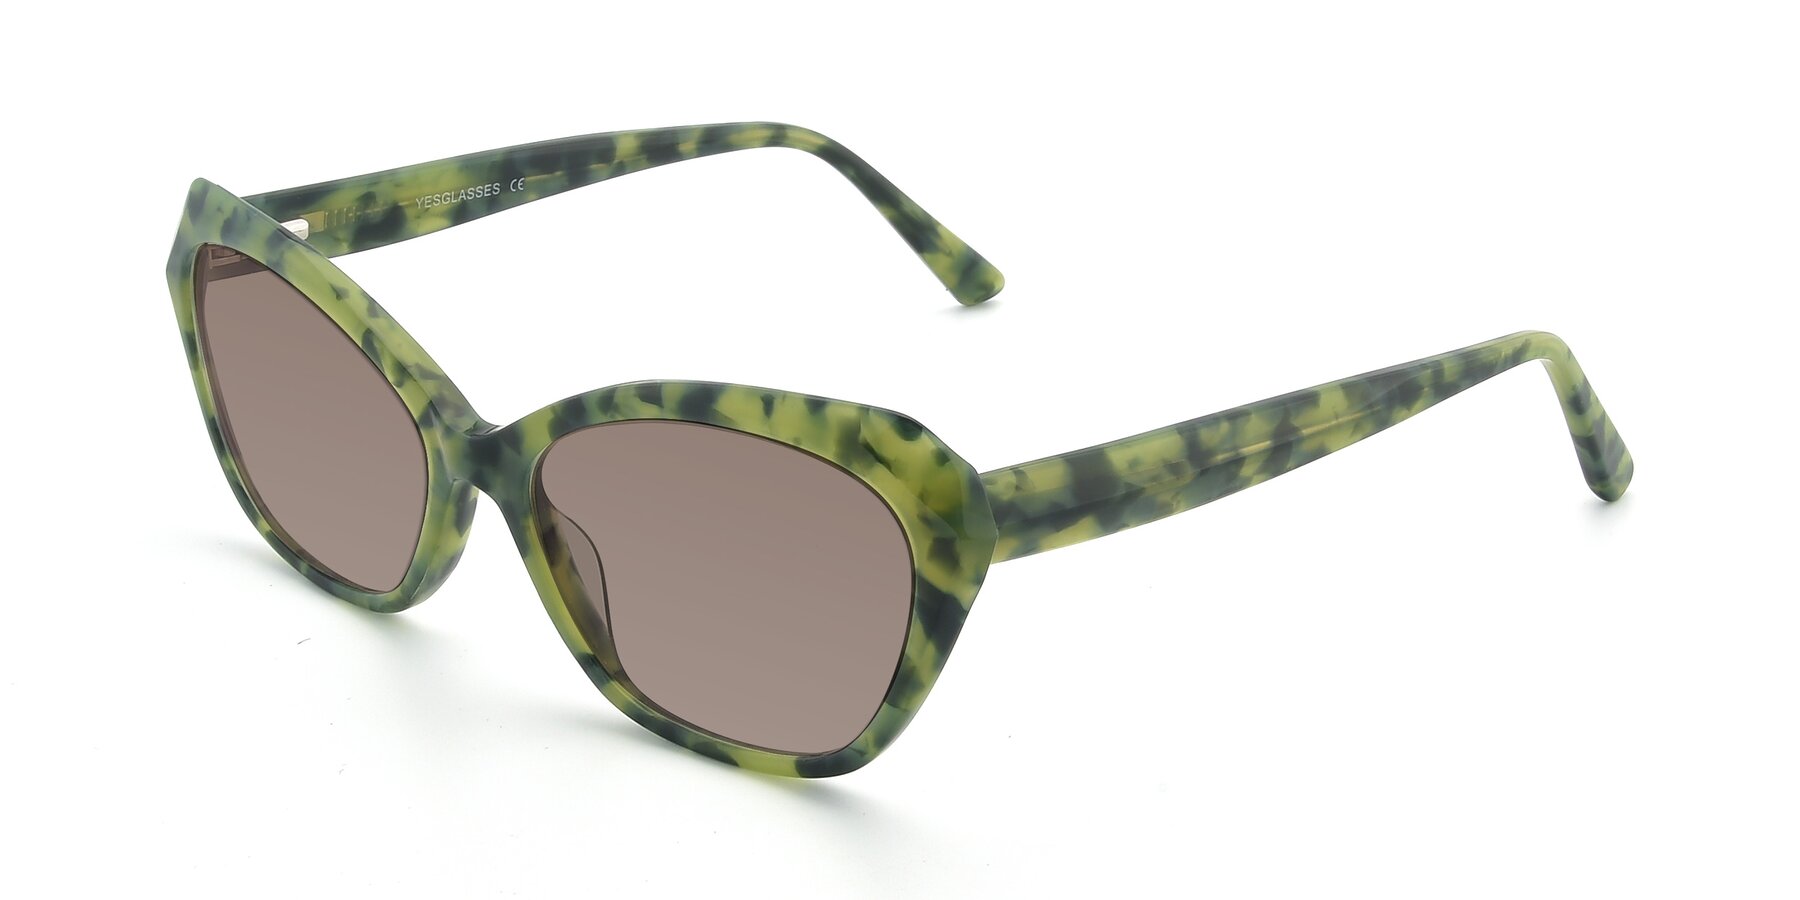 Angle of 17351 in Floral Green with Medium Brown Tinted Lenses